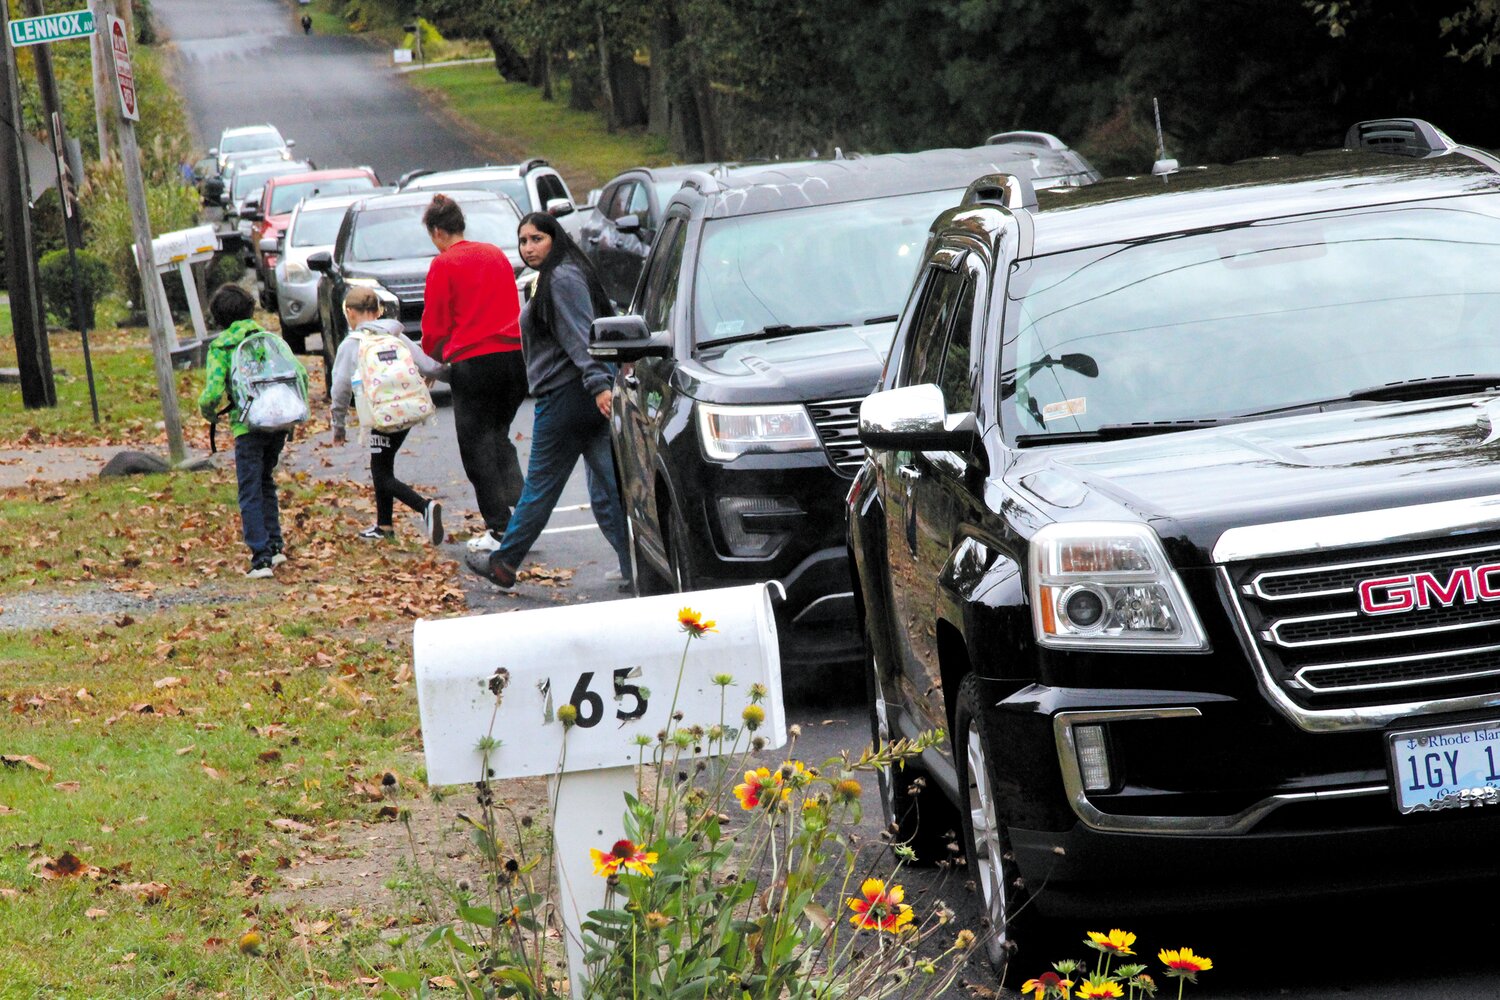 NAVIGATING TRAFFIC: Adults and students cut between traffic on Rocky Point Avenue to get to Warwick Neck School.  (Warwick Beacon photos)